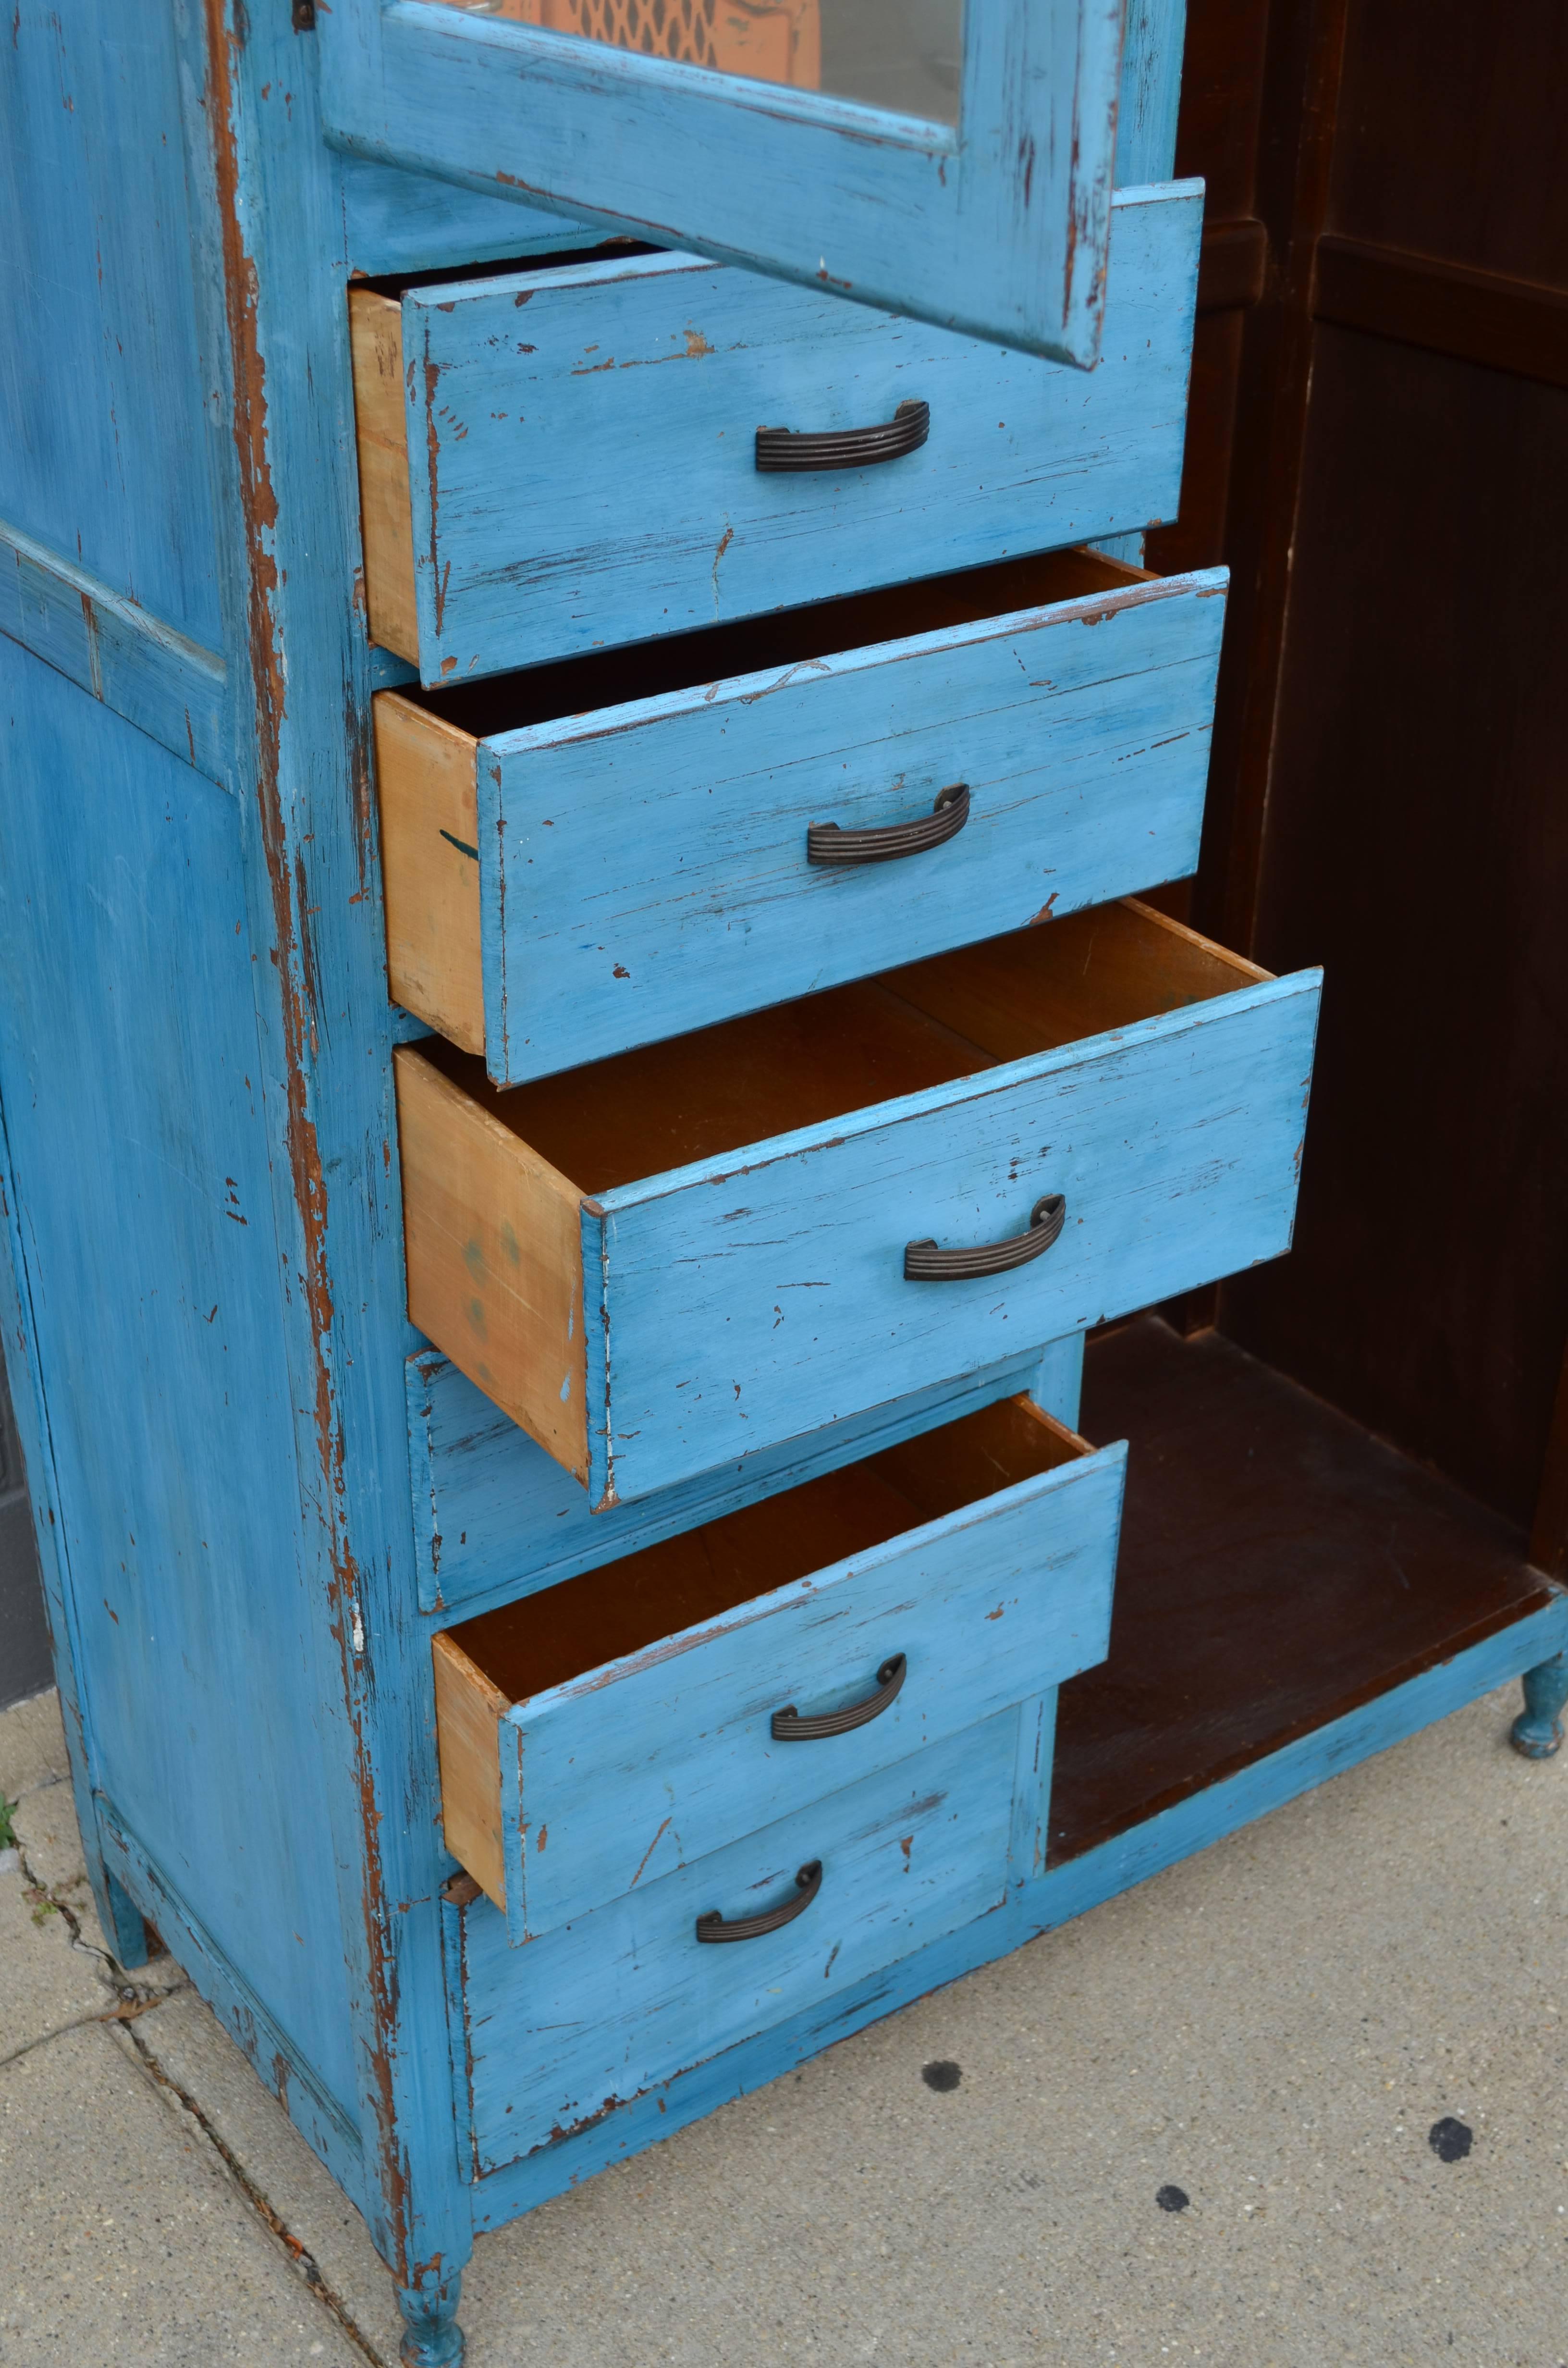 Mahogany Storage Cupboard Closet, 1930s, in as-Found Blue for Home, Apartment, Cottage